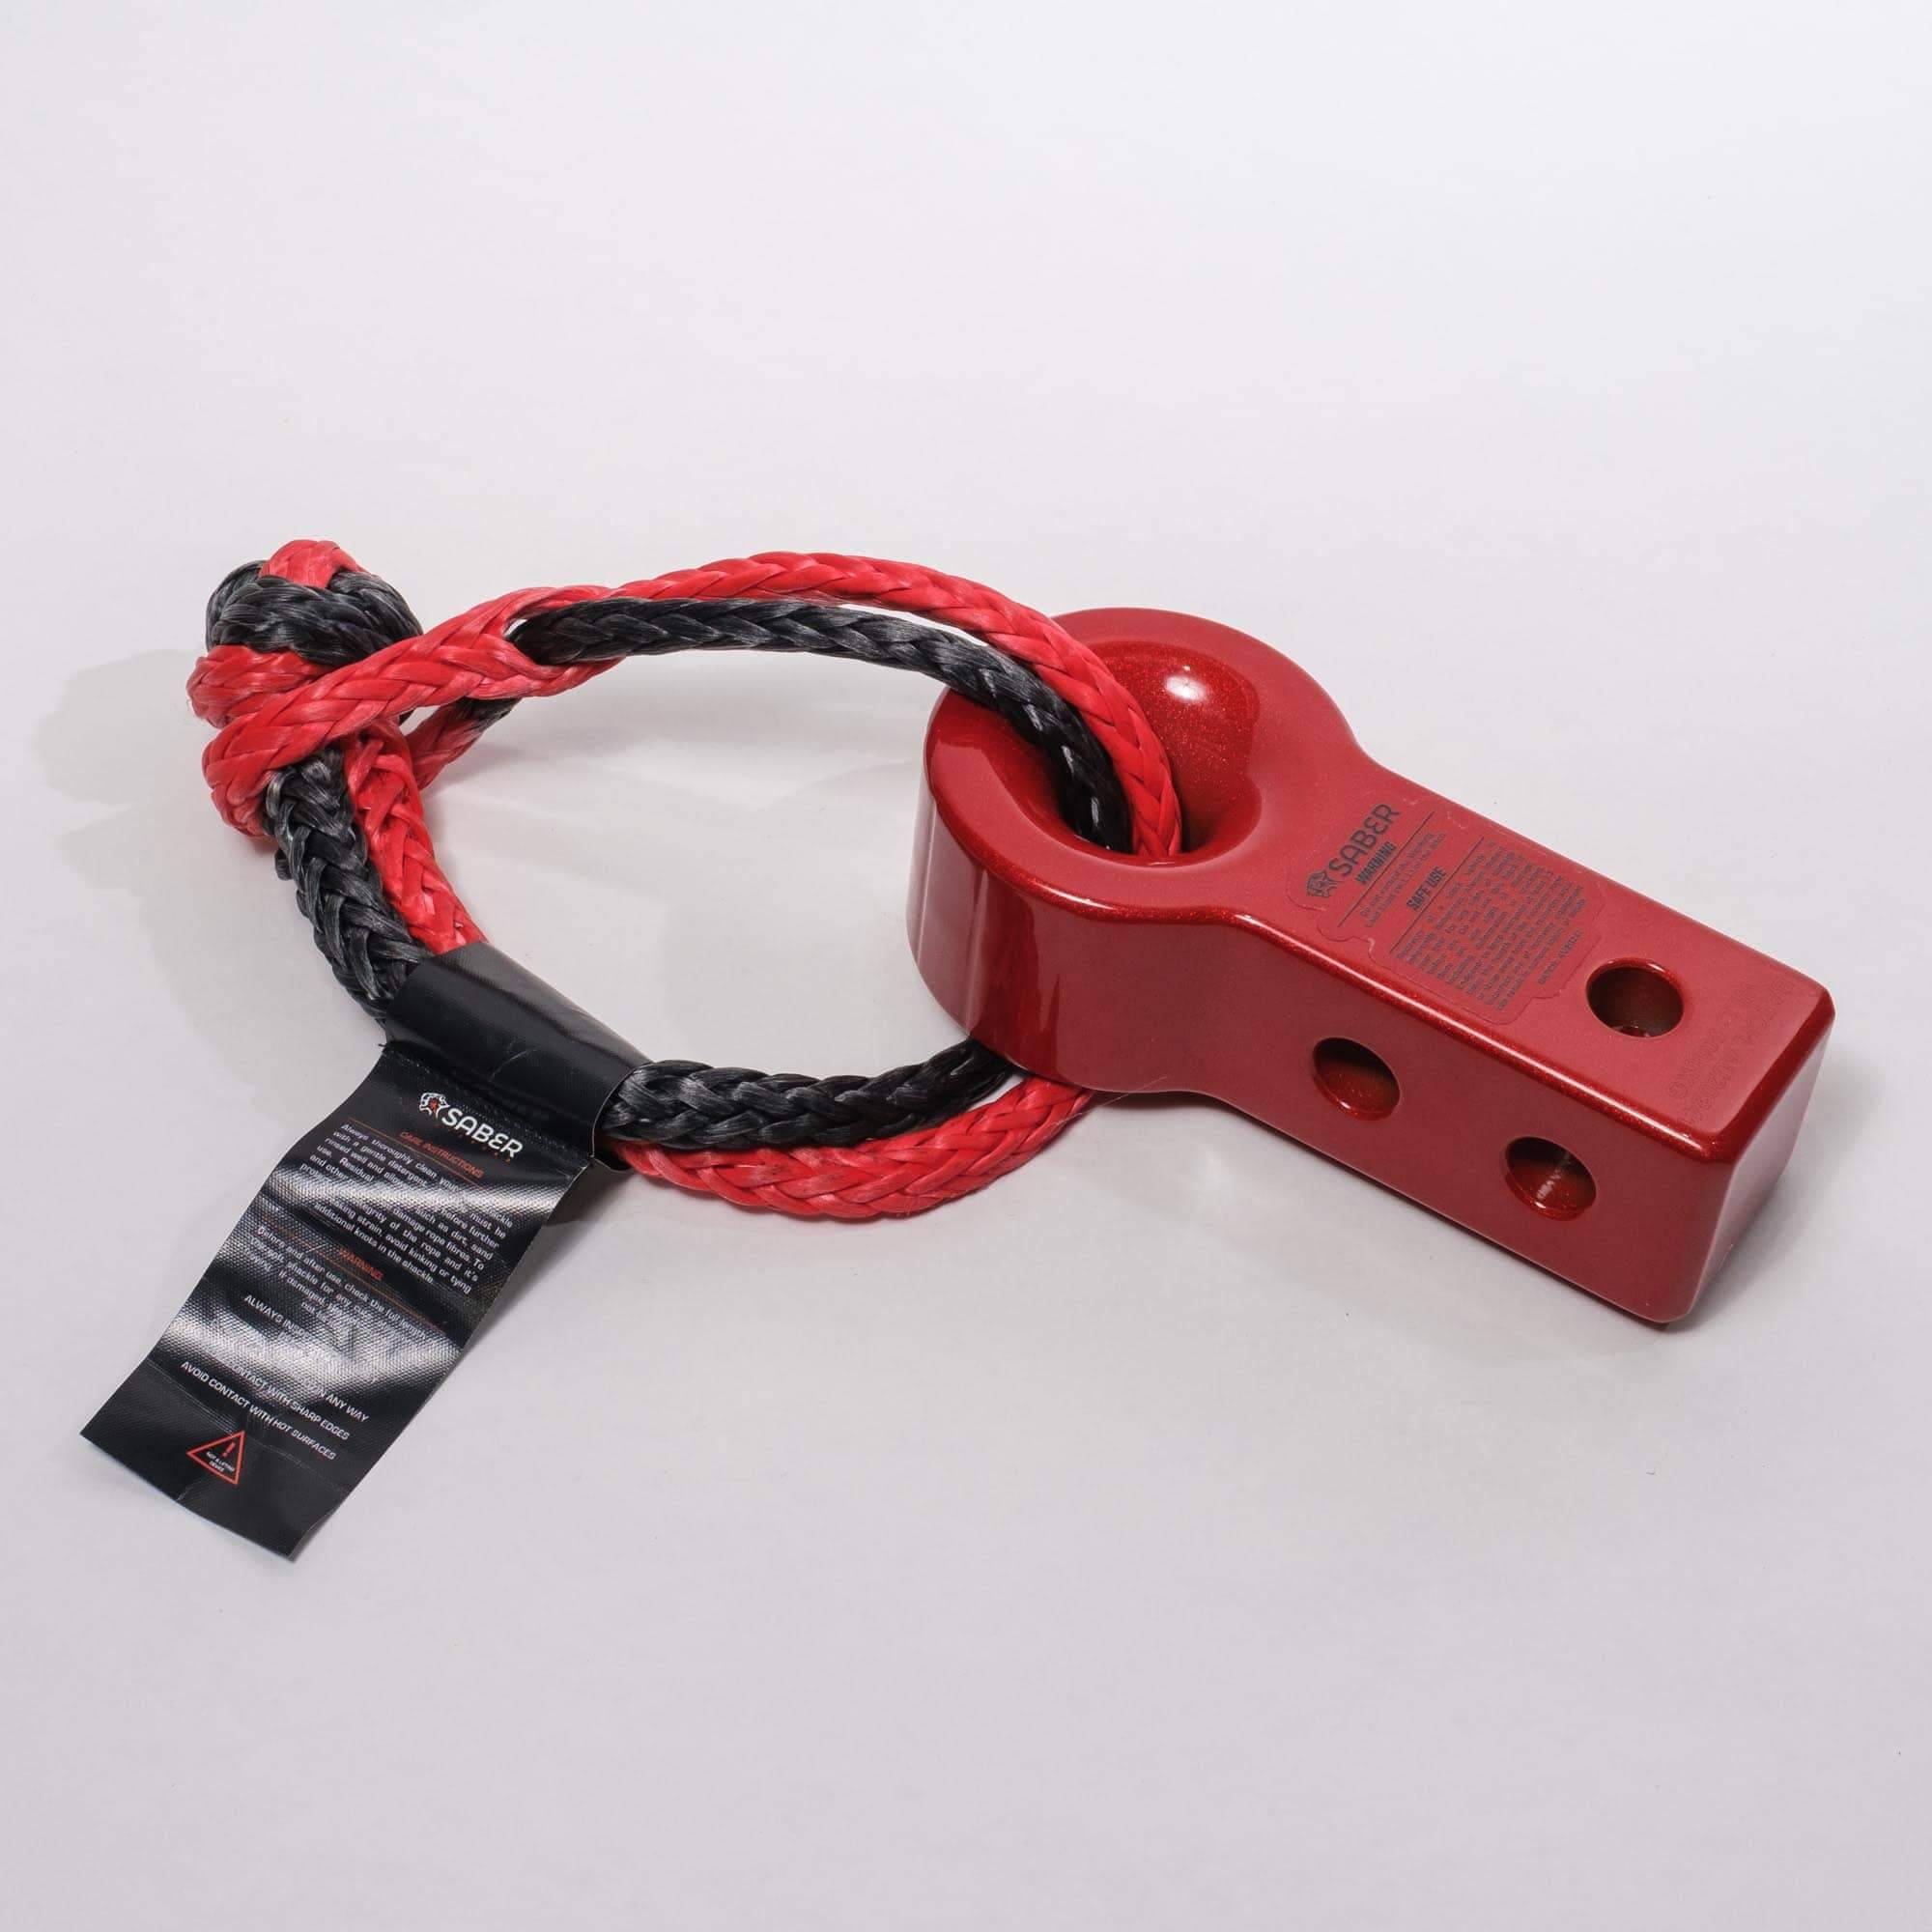 Saber Offroad 7075 Soft Shackle Only Aluminium Recovery Hitch – Prismatic Red & 9K Soft Shackle | Saber Offroad